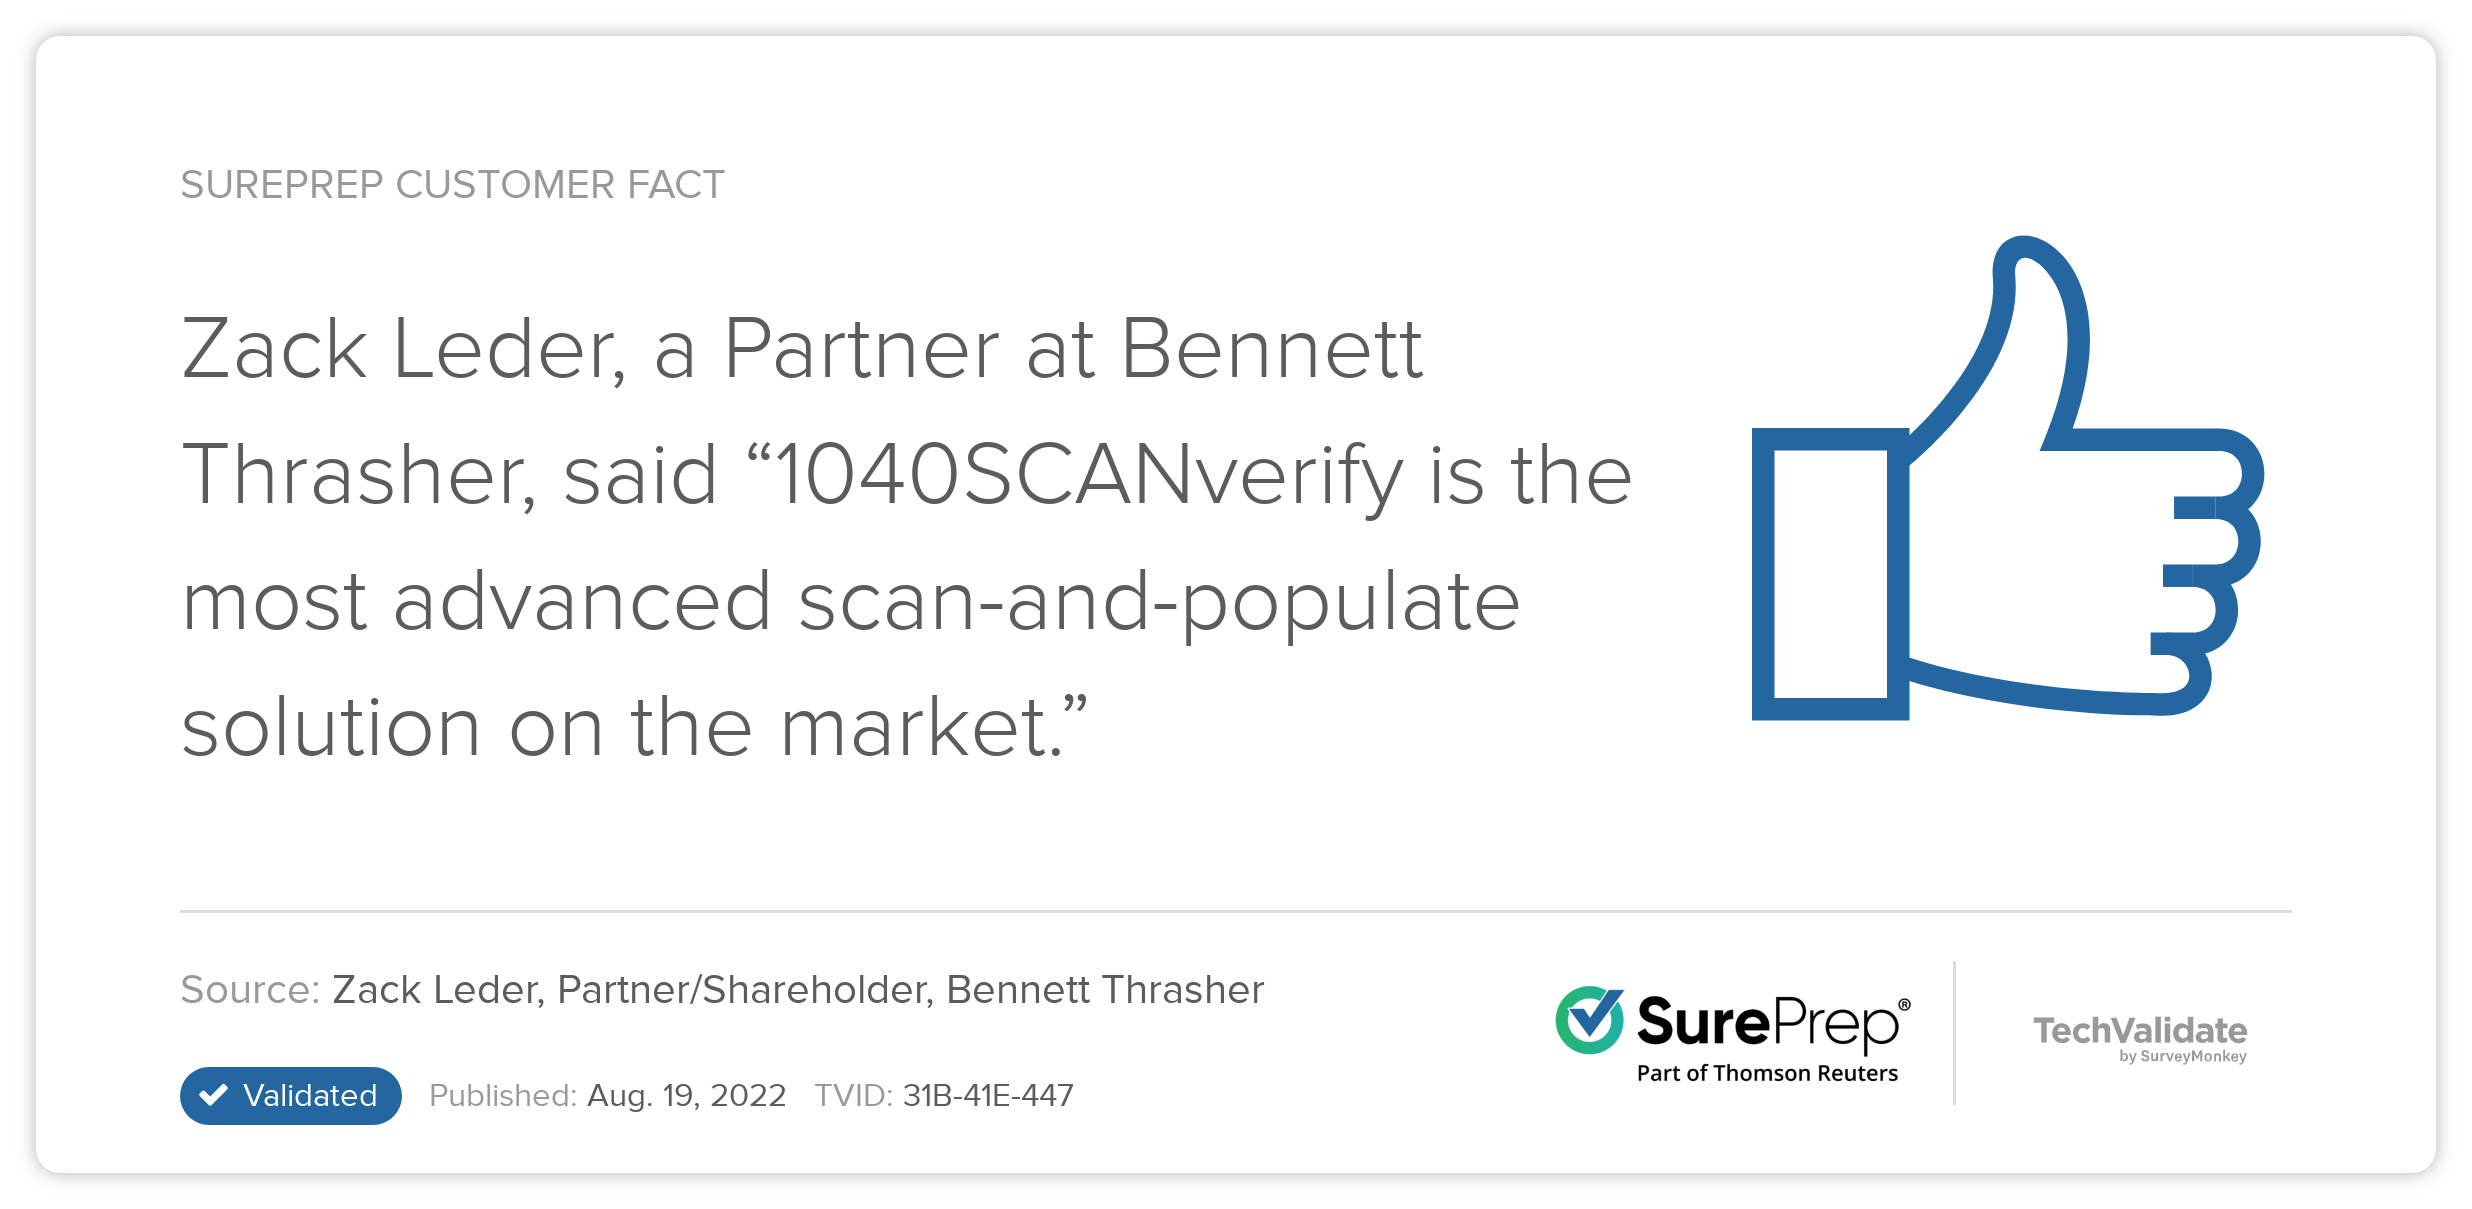 Zack Leder, a Partner at Bennett Thrasher, said "1040SCANverify is the most advanced scan-and-populate solution on the market."